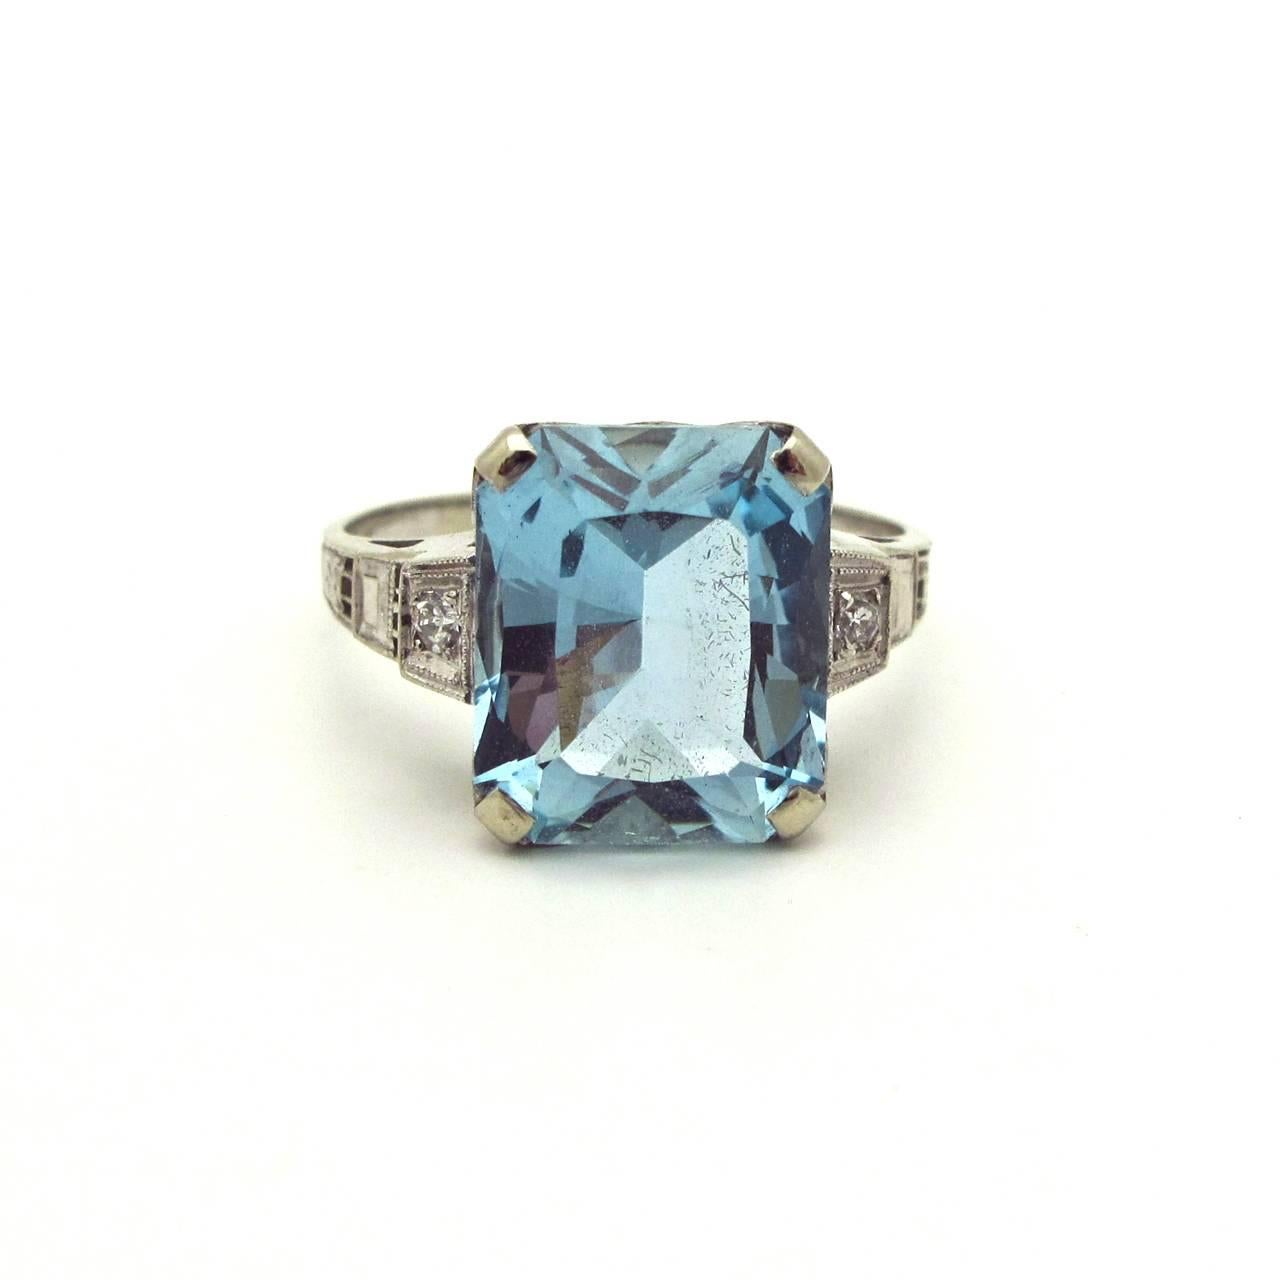 This stunning aquamarine emerald cut stone is a deep aqua blue. Accented by diamonds and set in white gold the combination is perfect!! This would make an exceptional engagement ring or just a lovely stunner to wear everyday.